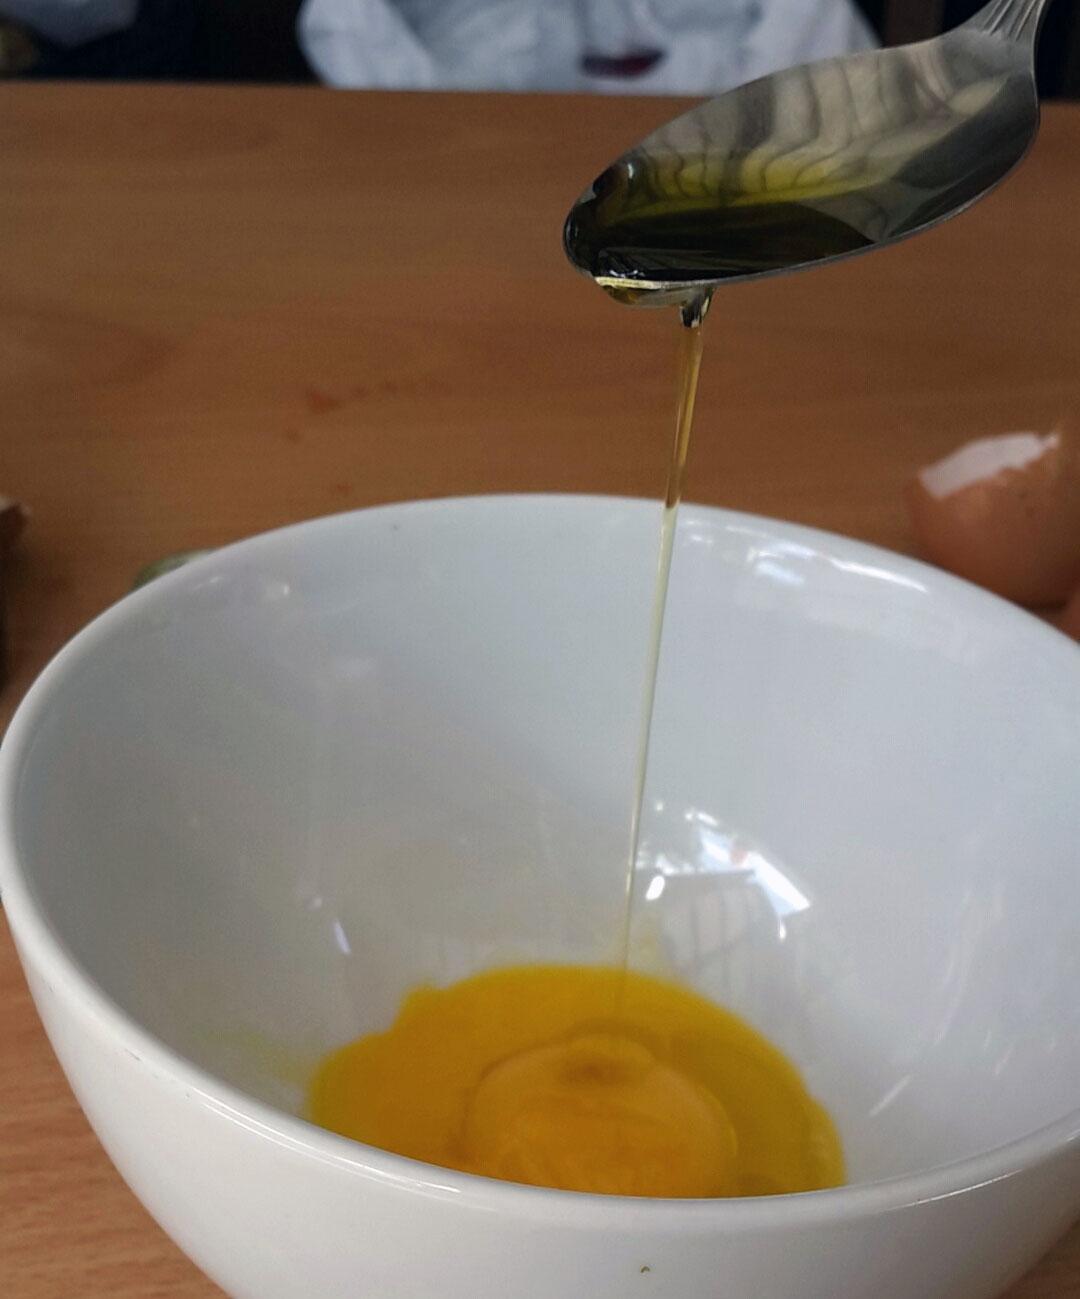 Mixing Olive Oil with Egg Yolk